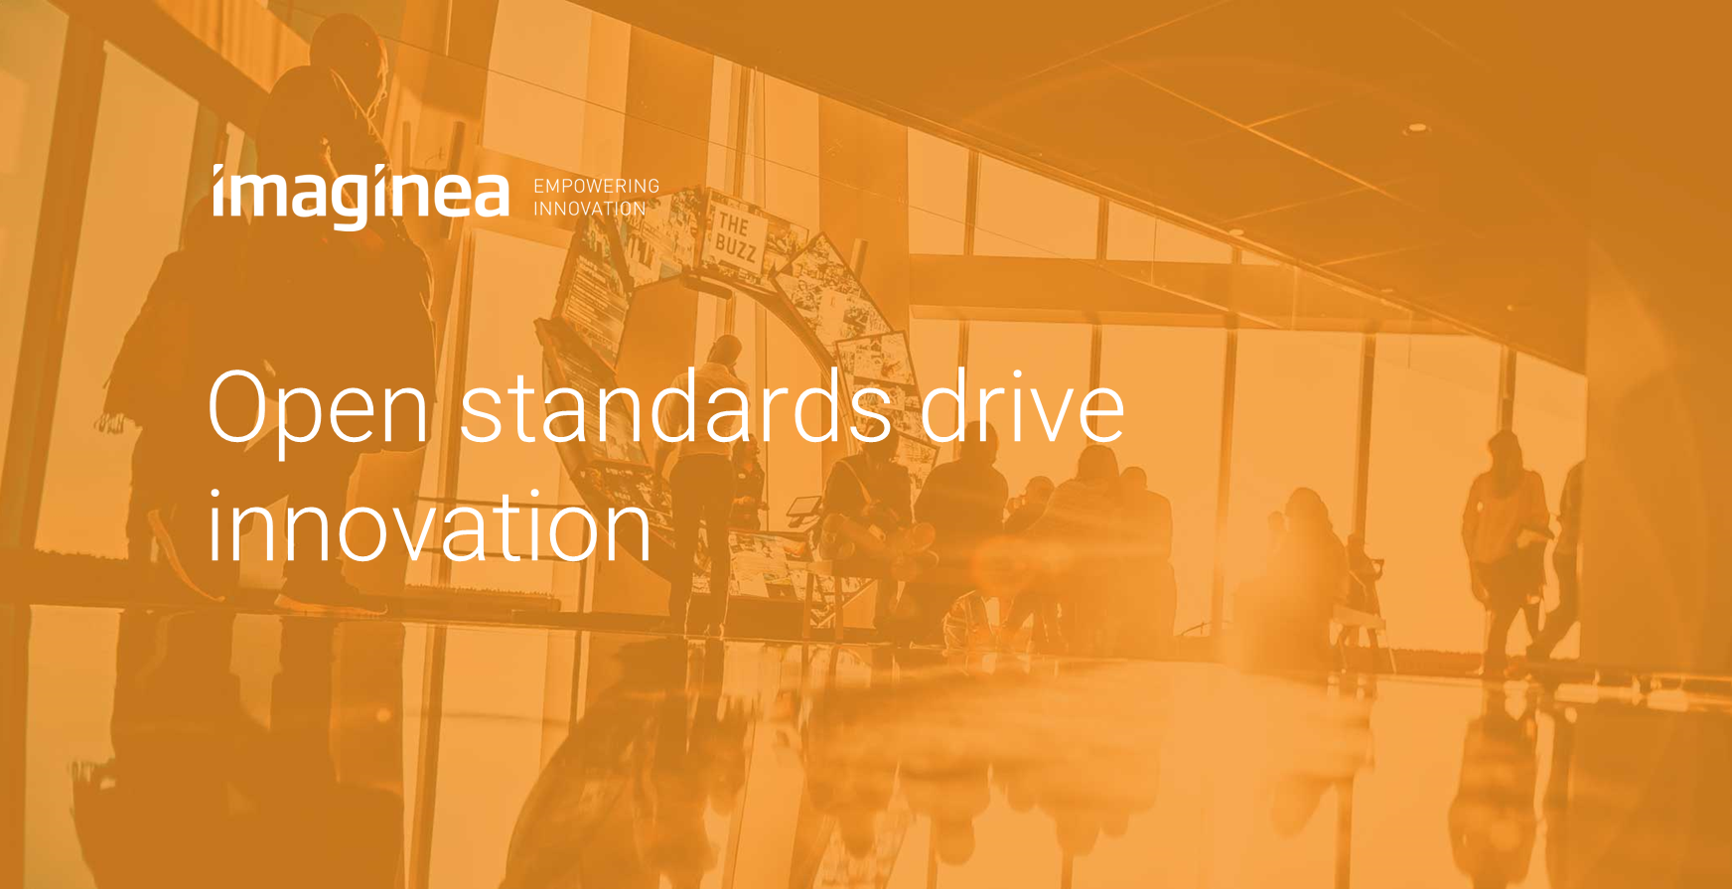 Open standards are the key to innovation